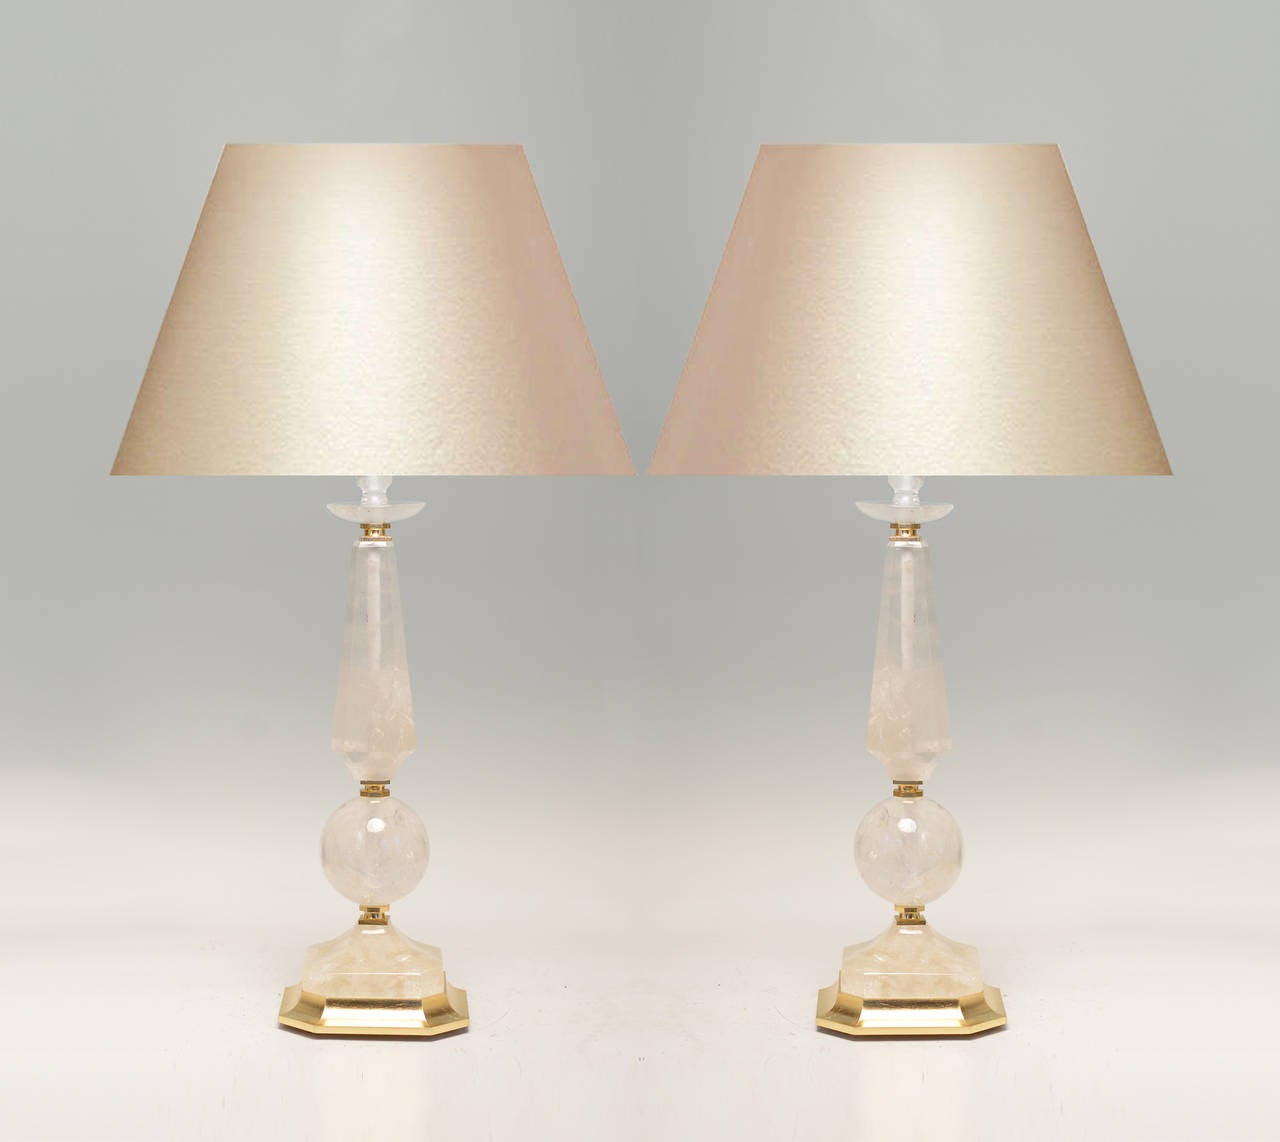 A fine carved prism and globe form rock crystal quartz lamp with polish brass base, created by Phoenix Gallery, NYC.
Available in nickel plating and antique brass finished.
To the rock crystal: 21